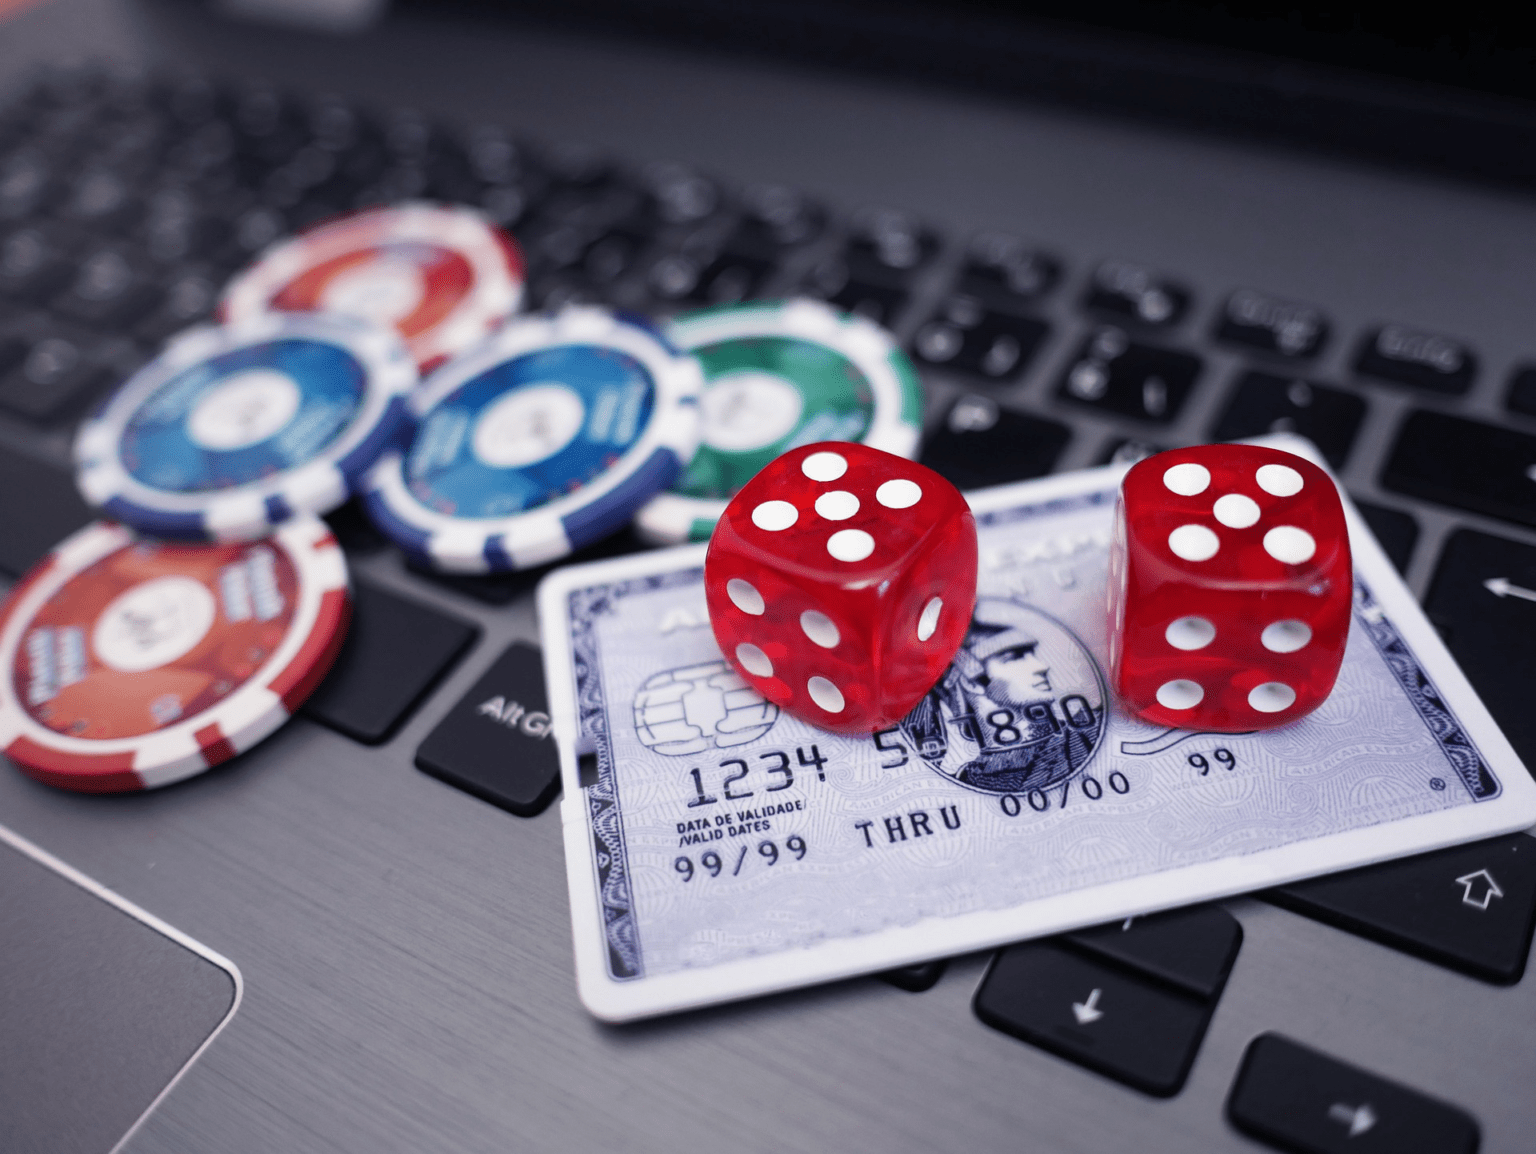 The Top 10 Tips for Winning Big at Online Casinos